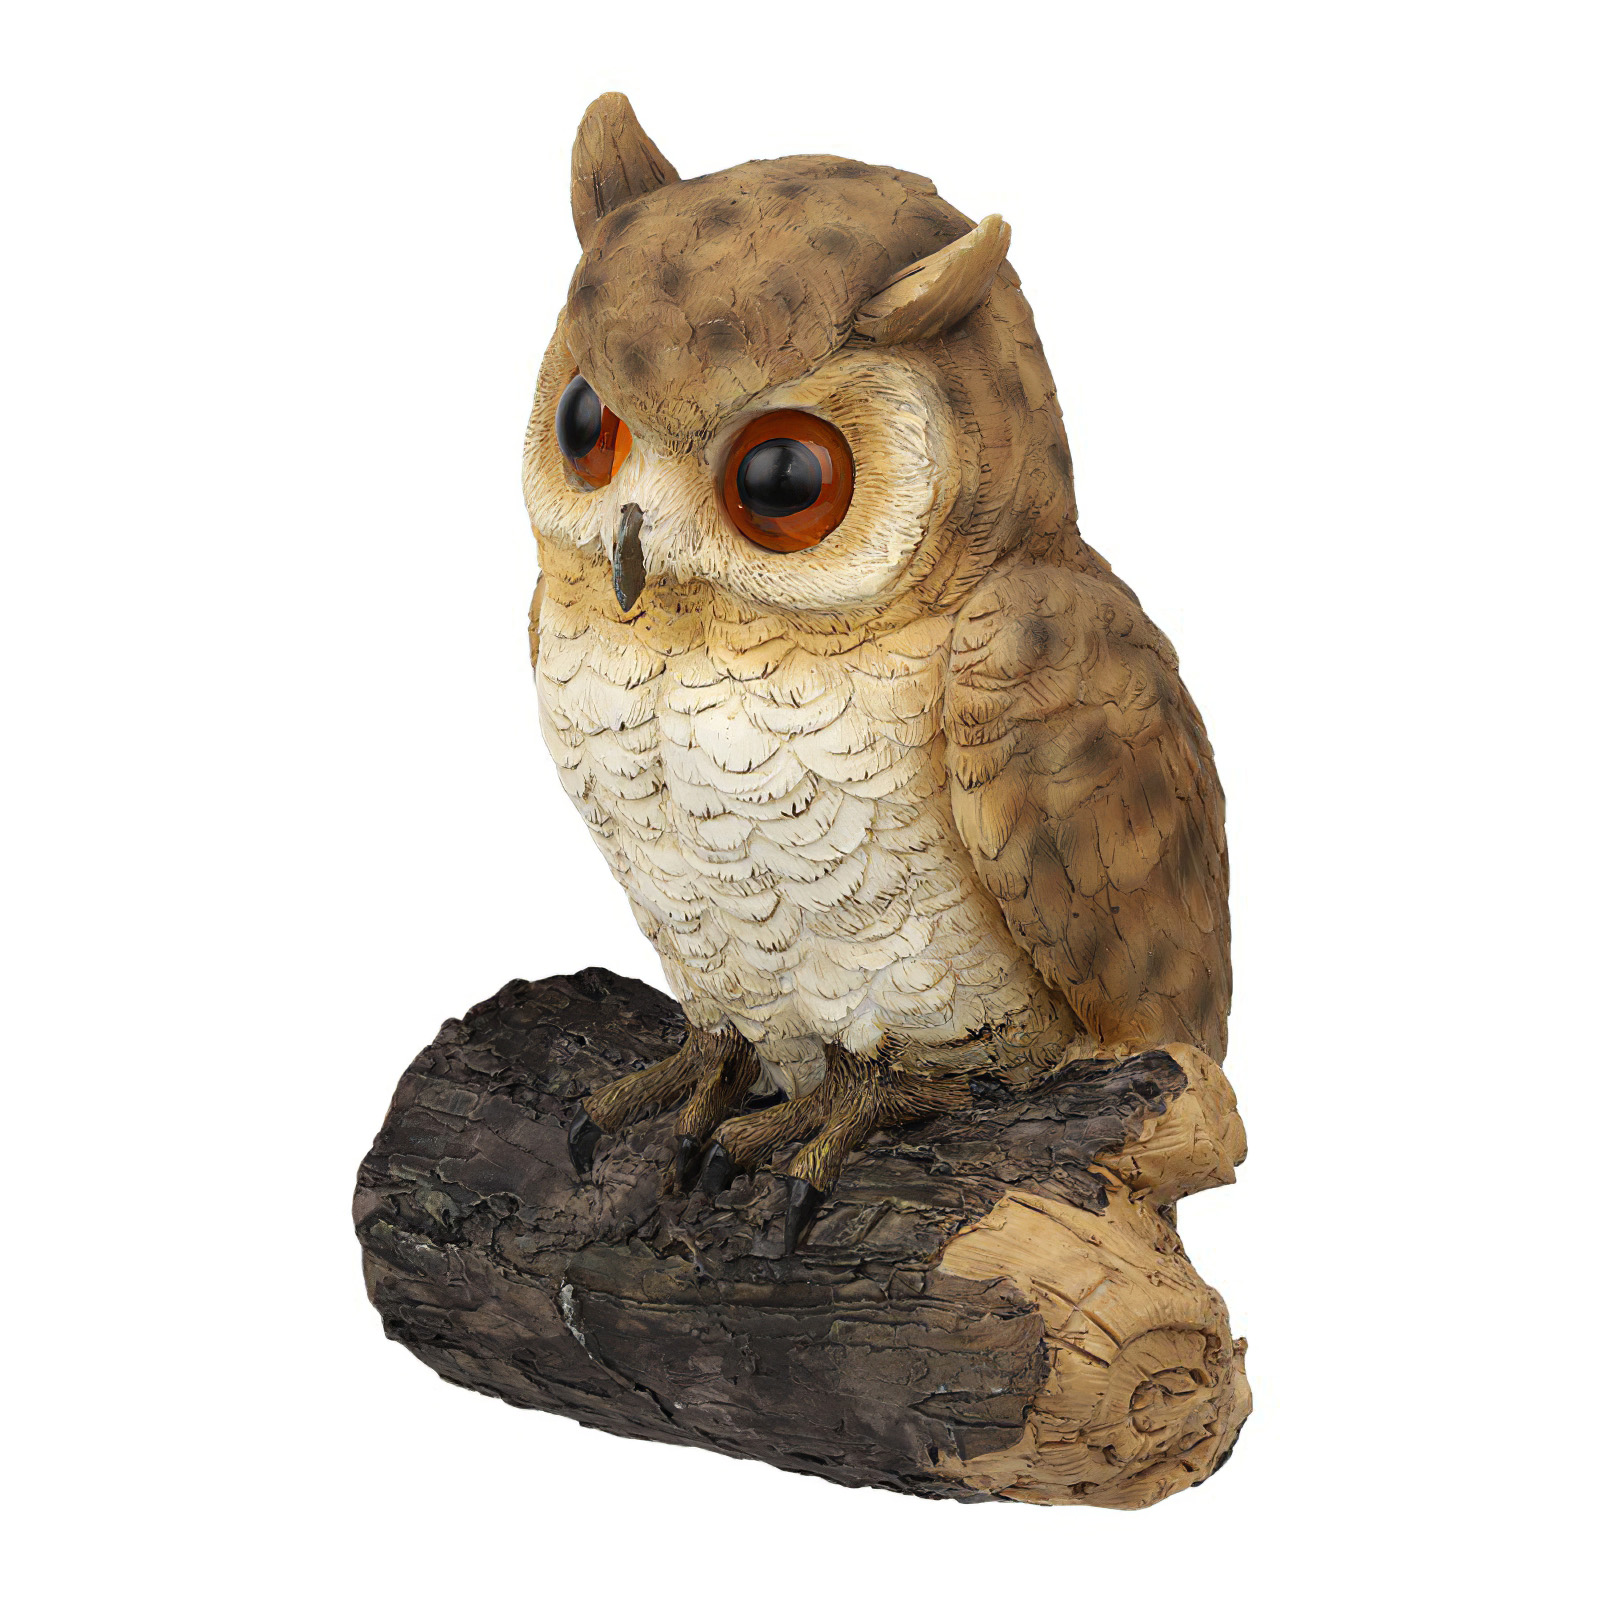 Toma Resin Owl Statue Realistic Owl Decoration Hanging Owl Sculpture Decorative Garden Owl Figurine for Outdoor Courtyard Balcony - image 1 of 10